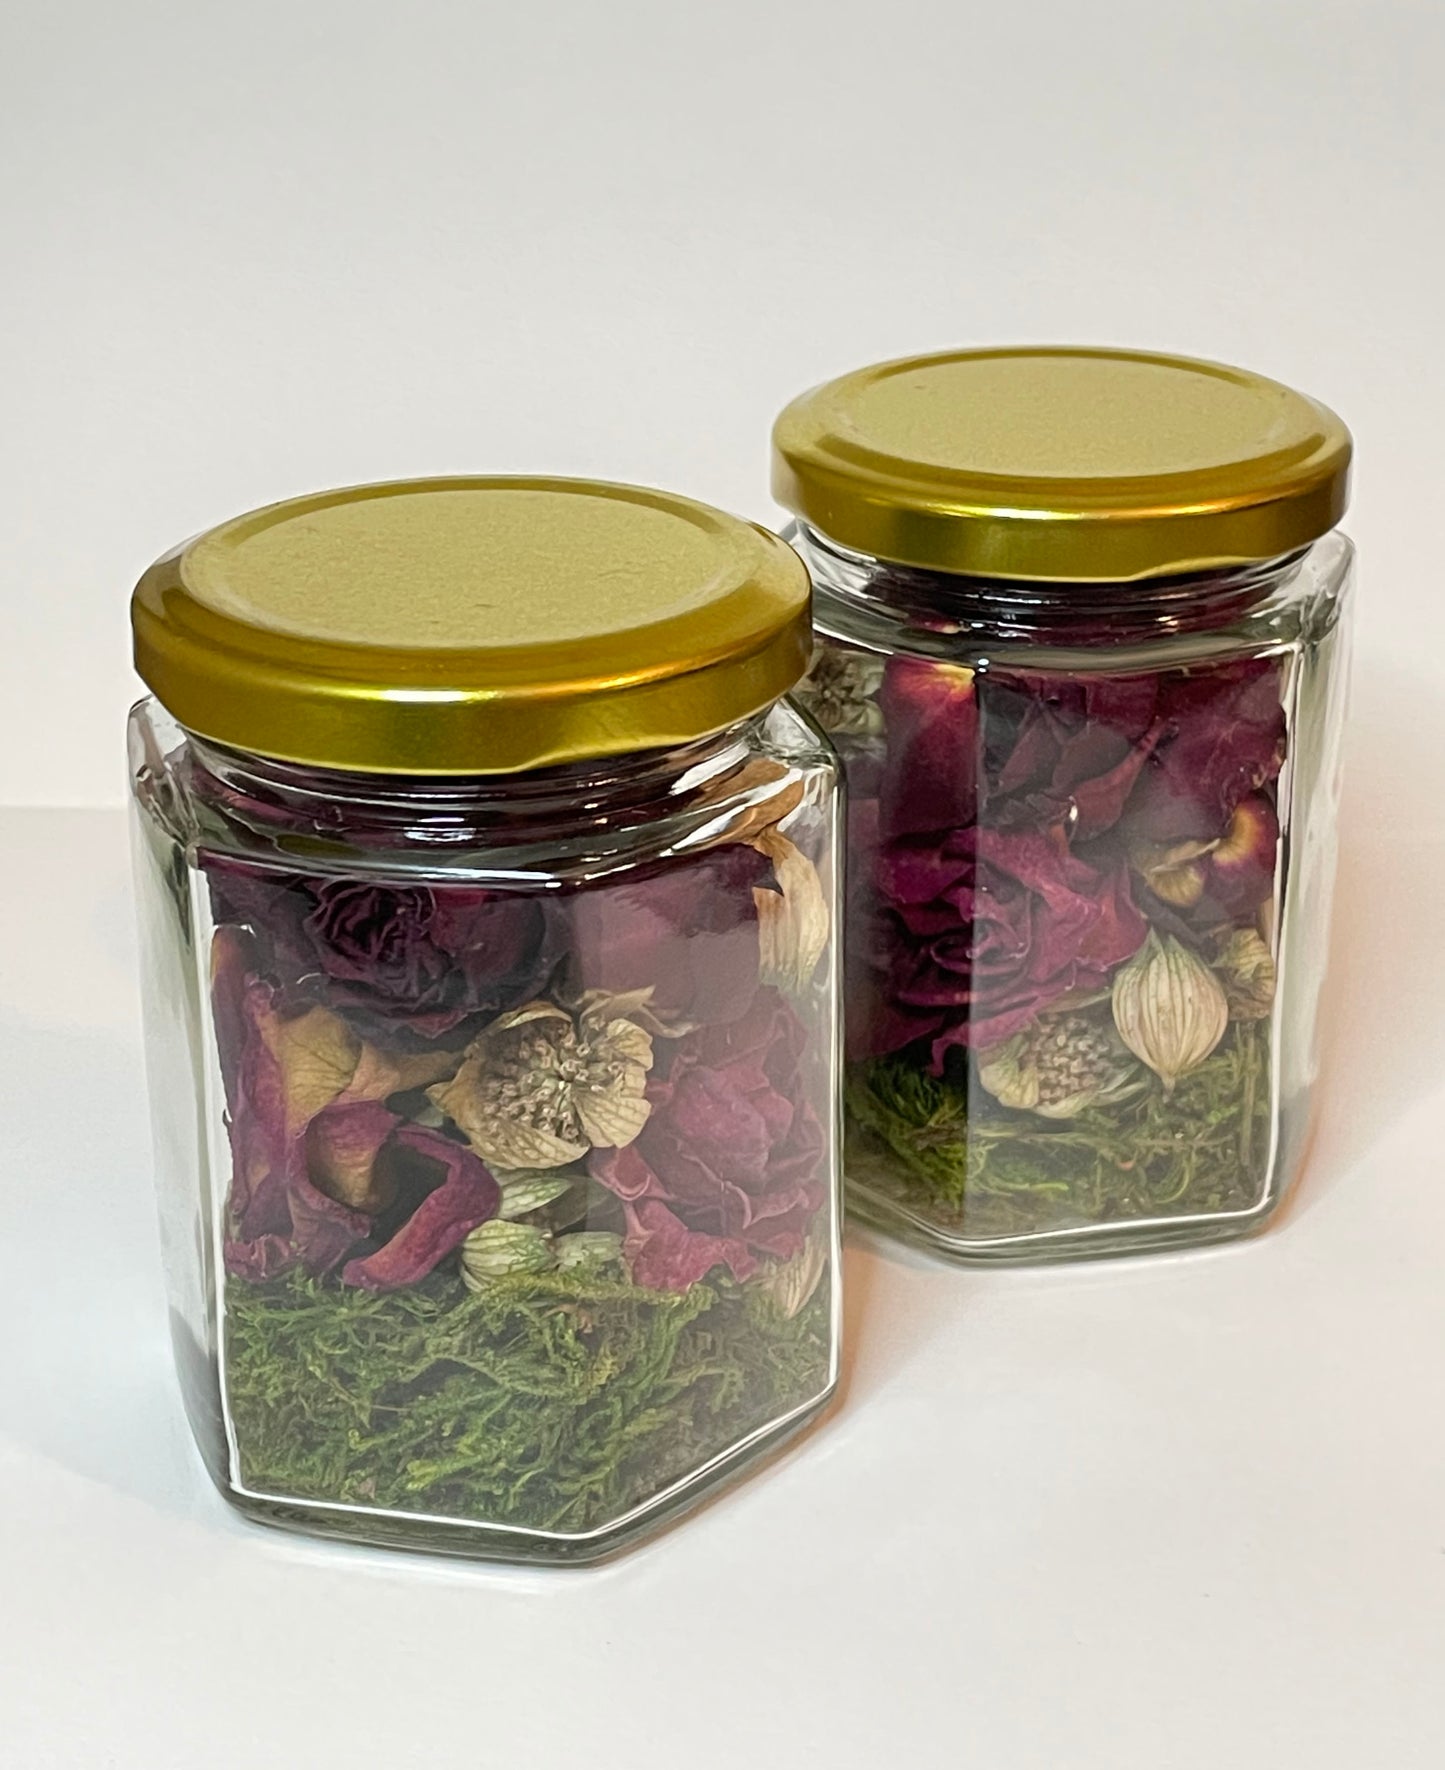 Set of 2: Dried Roses with Astrantia Blossoms in Honeycomb Shaped Glass Jars with Gold Lids